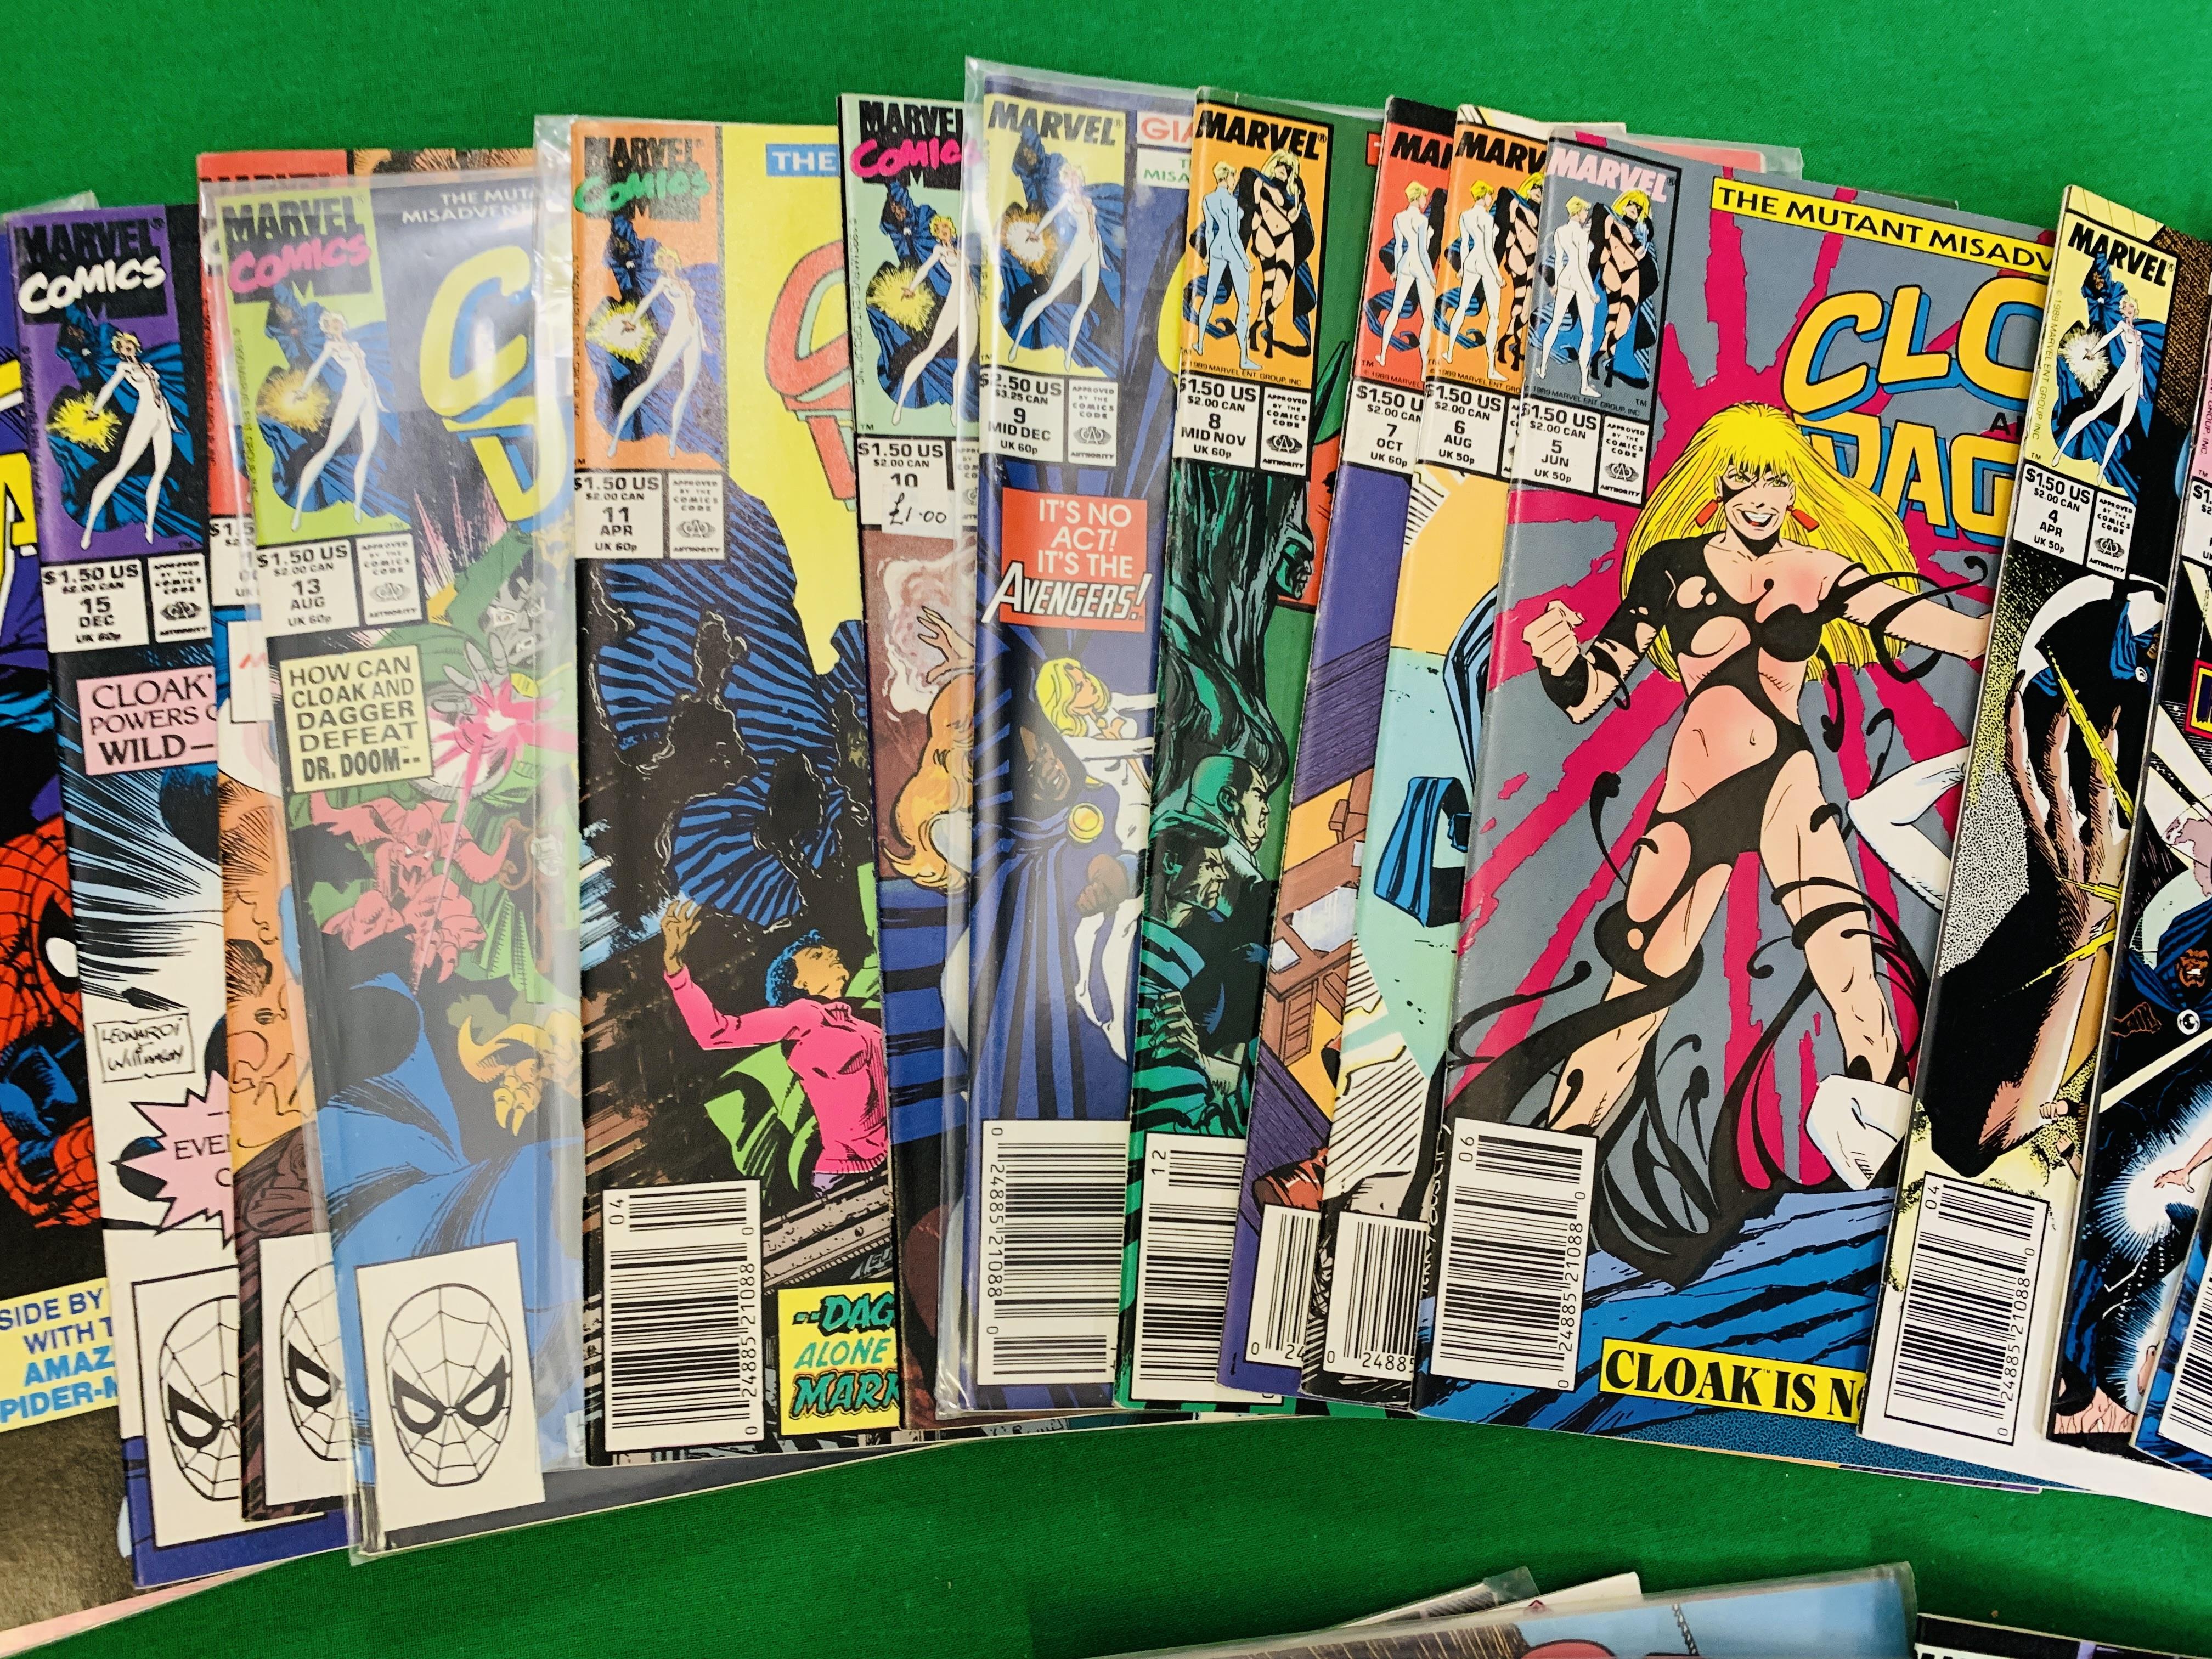 MARVEL COMICS CLOAK AND DAGGER NO. 1 - 4 FROM 1983, NO. 1 - 11 FROM 1985, NO. 1 - 19 FROM 1988. - Image 6 of 7